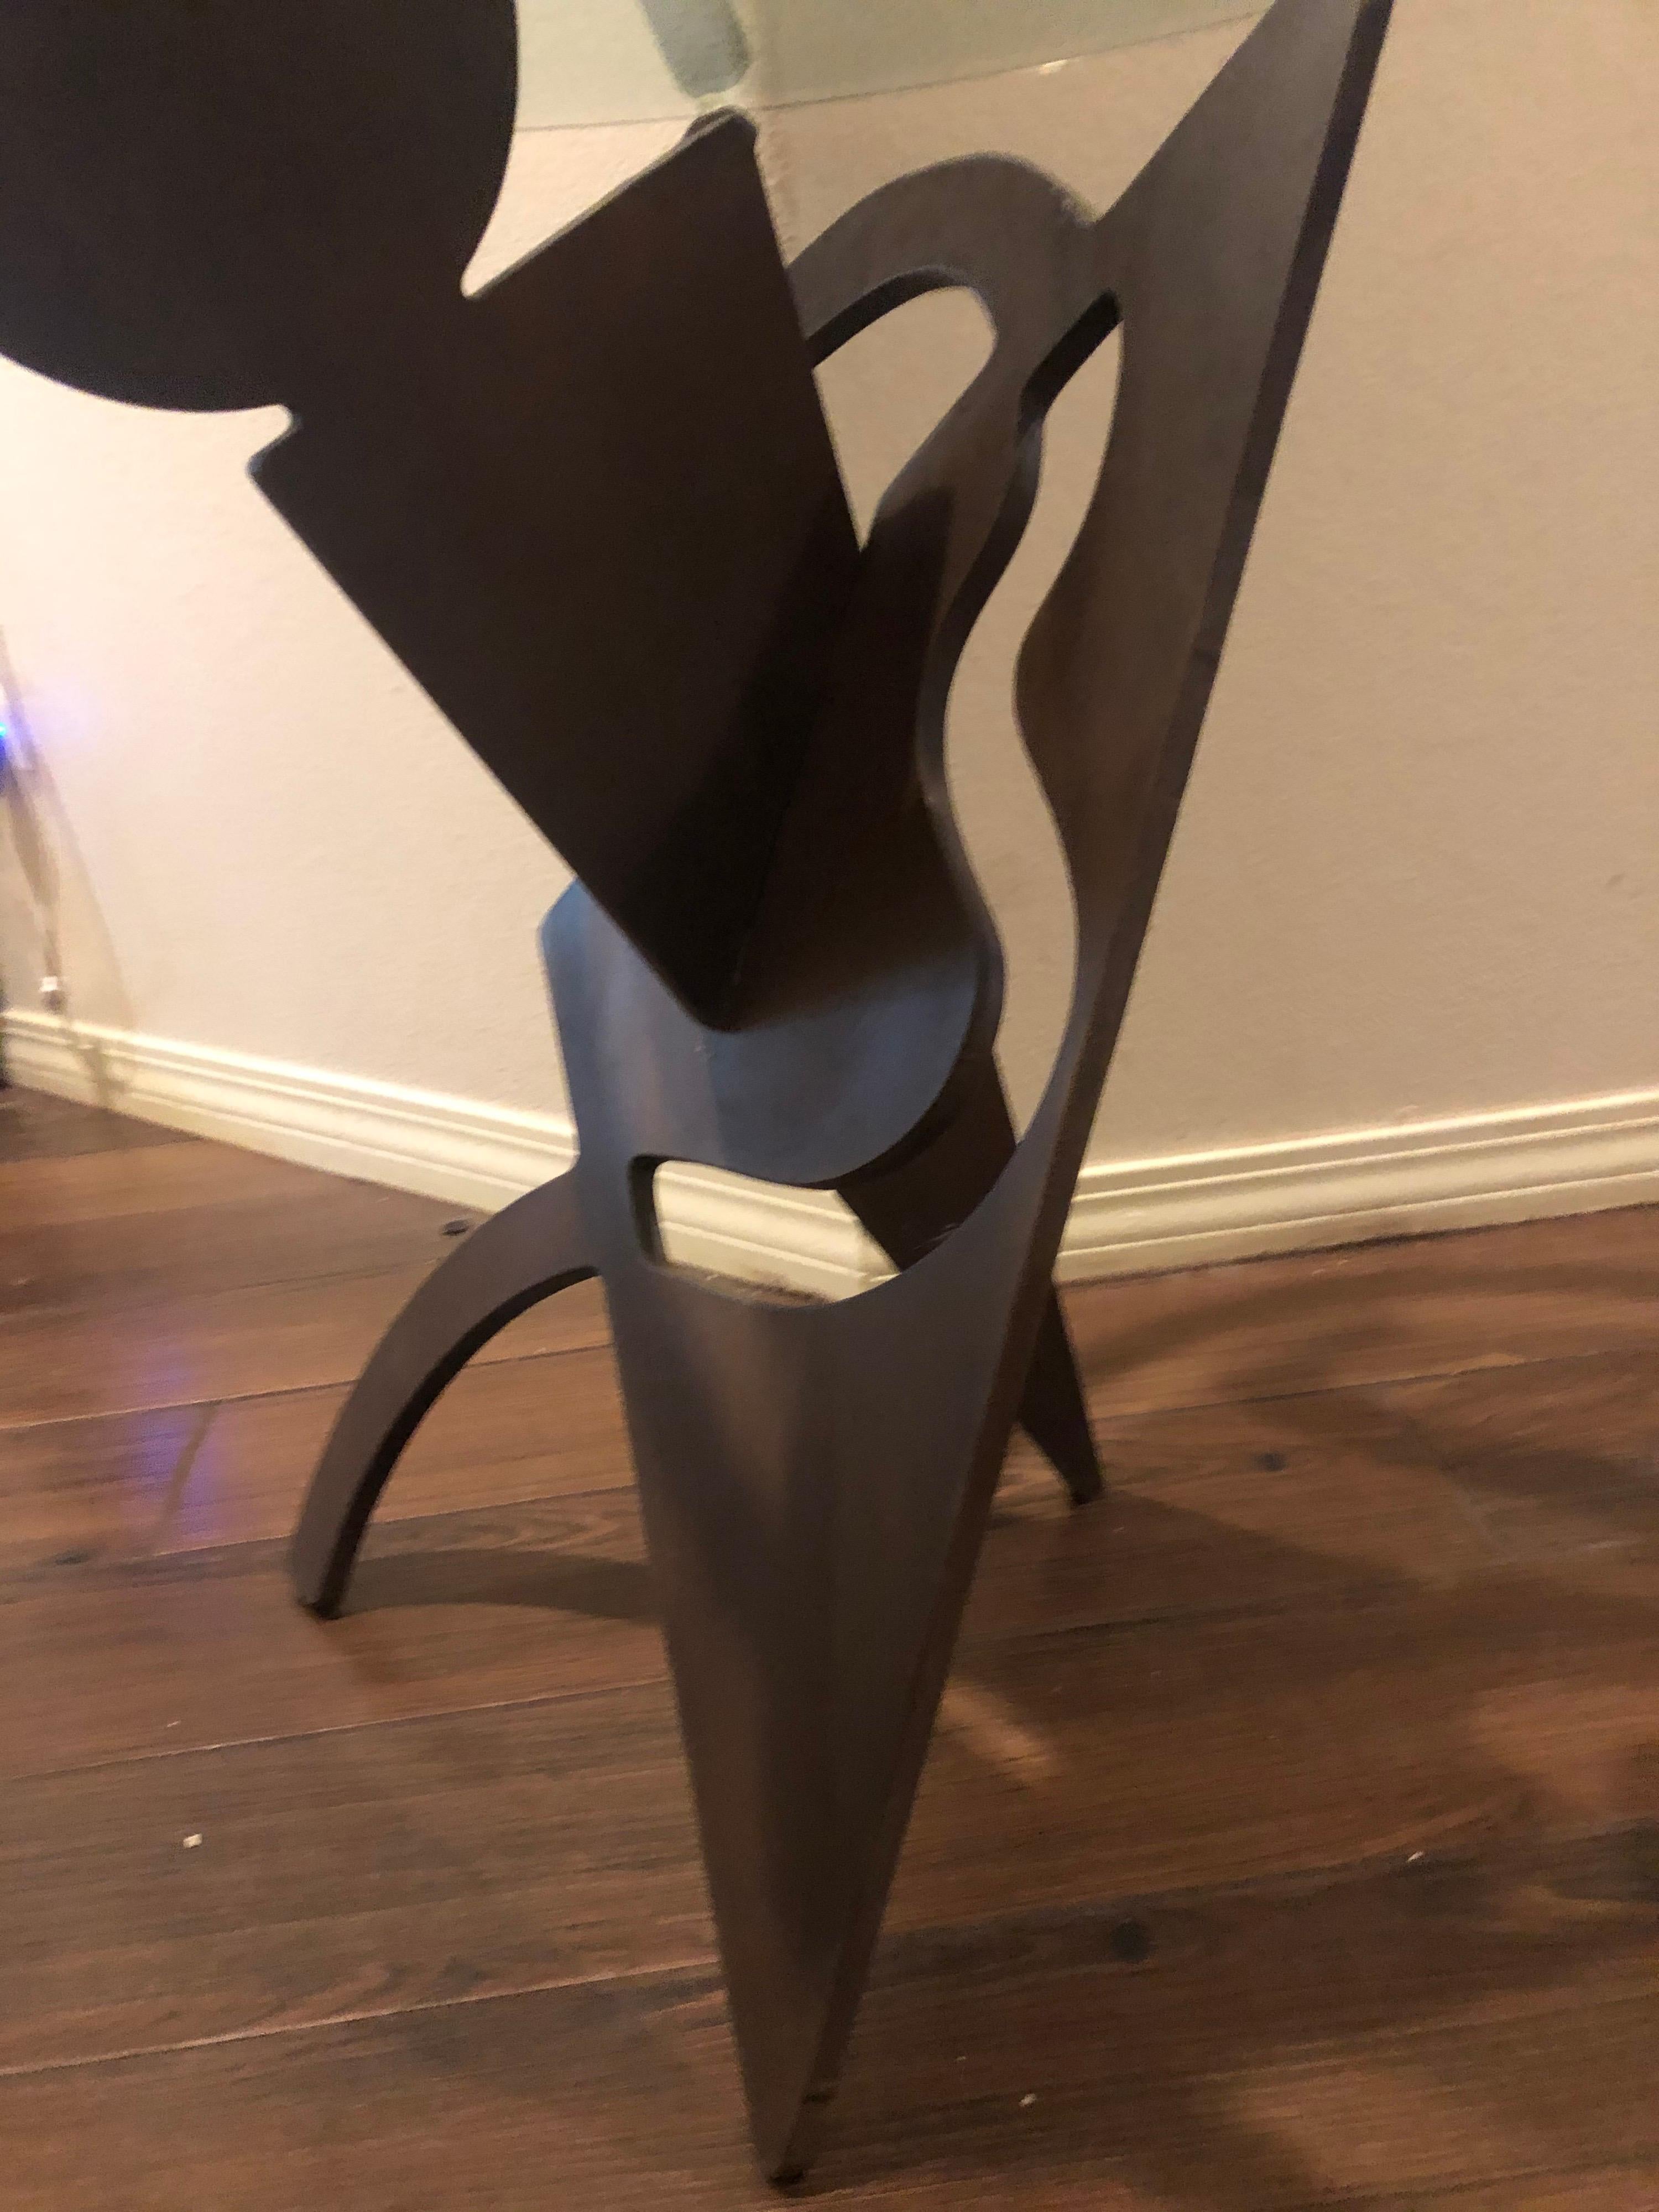 Another furniture as art piece by noted designer Pucci De Rossi, 1987. Rossi is a famous furniture designer that made furniture as sculptural works of art. Every single piece in his book is museum worthy. This piece is called “The Battista”. It is a